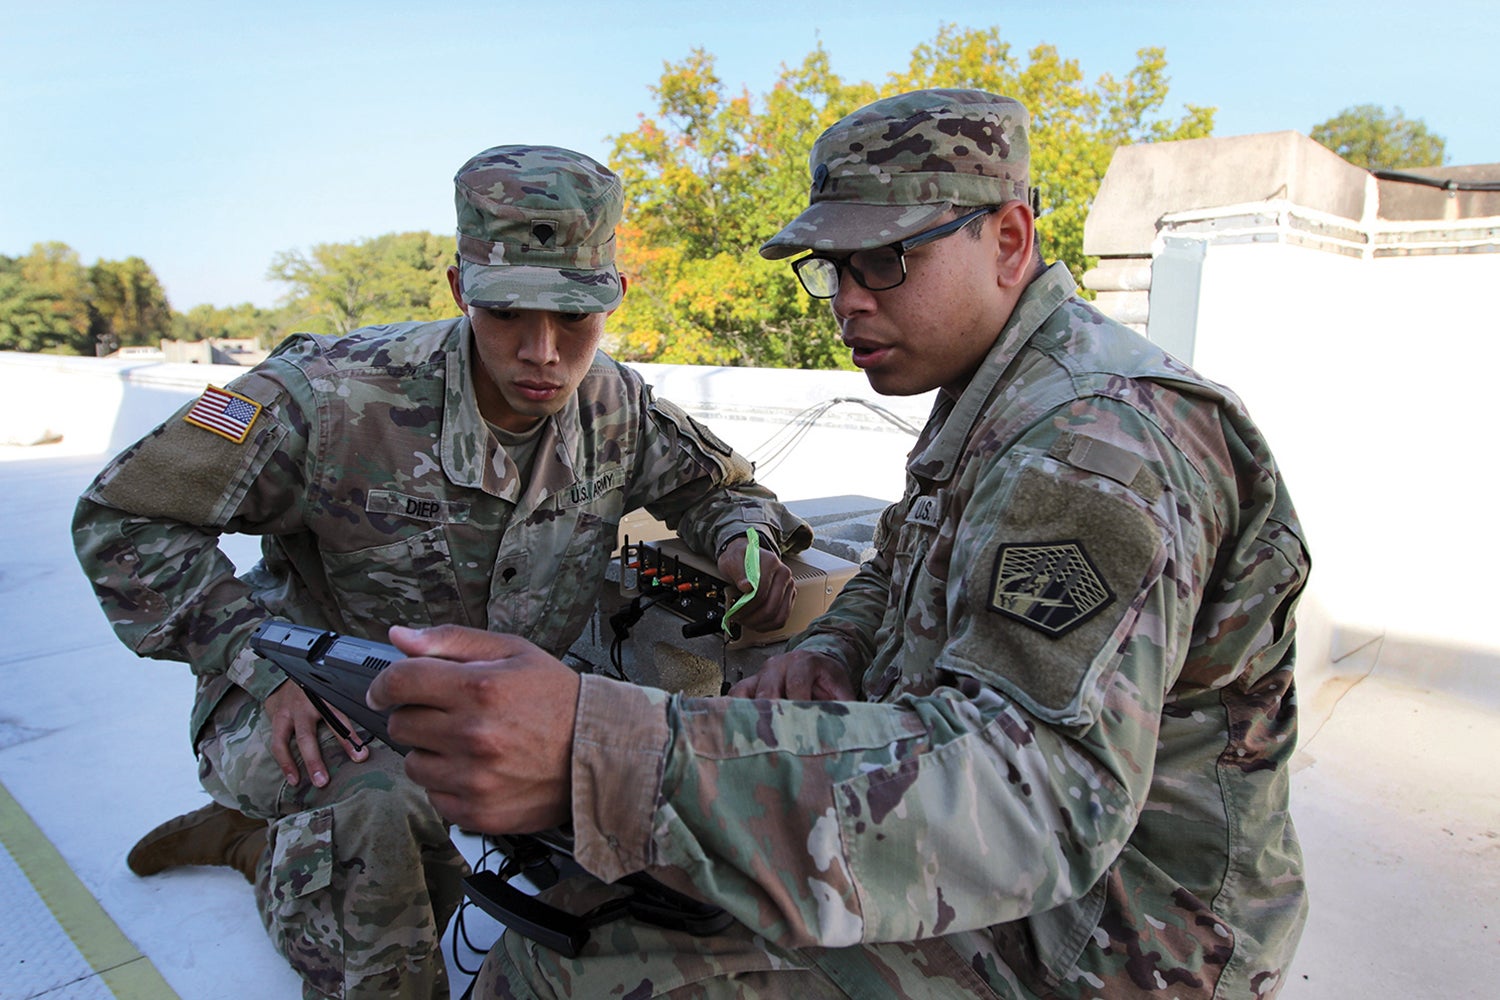 Spcs. Mike Diep, left, and Matthew Scruggs, of the 915th (now 11th) Cyberspace Warfare Battalion, participate in an exercise at Muscatatuck Urban Training Center, Indiana. (Credit: U.S. Army/Steven Stover)